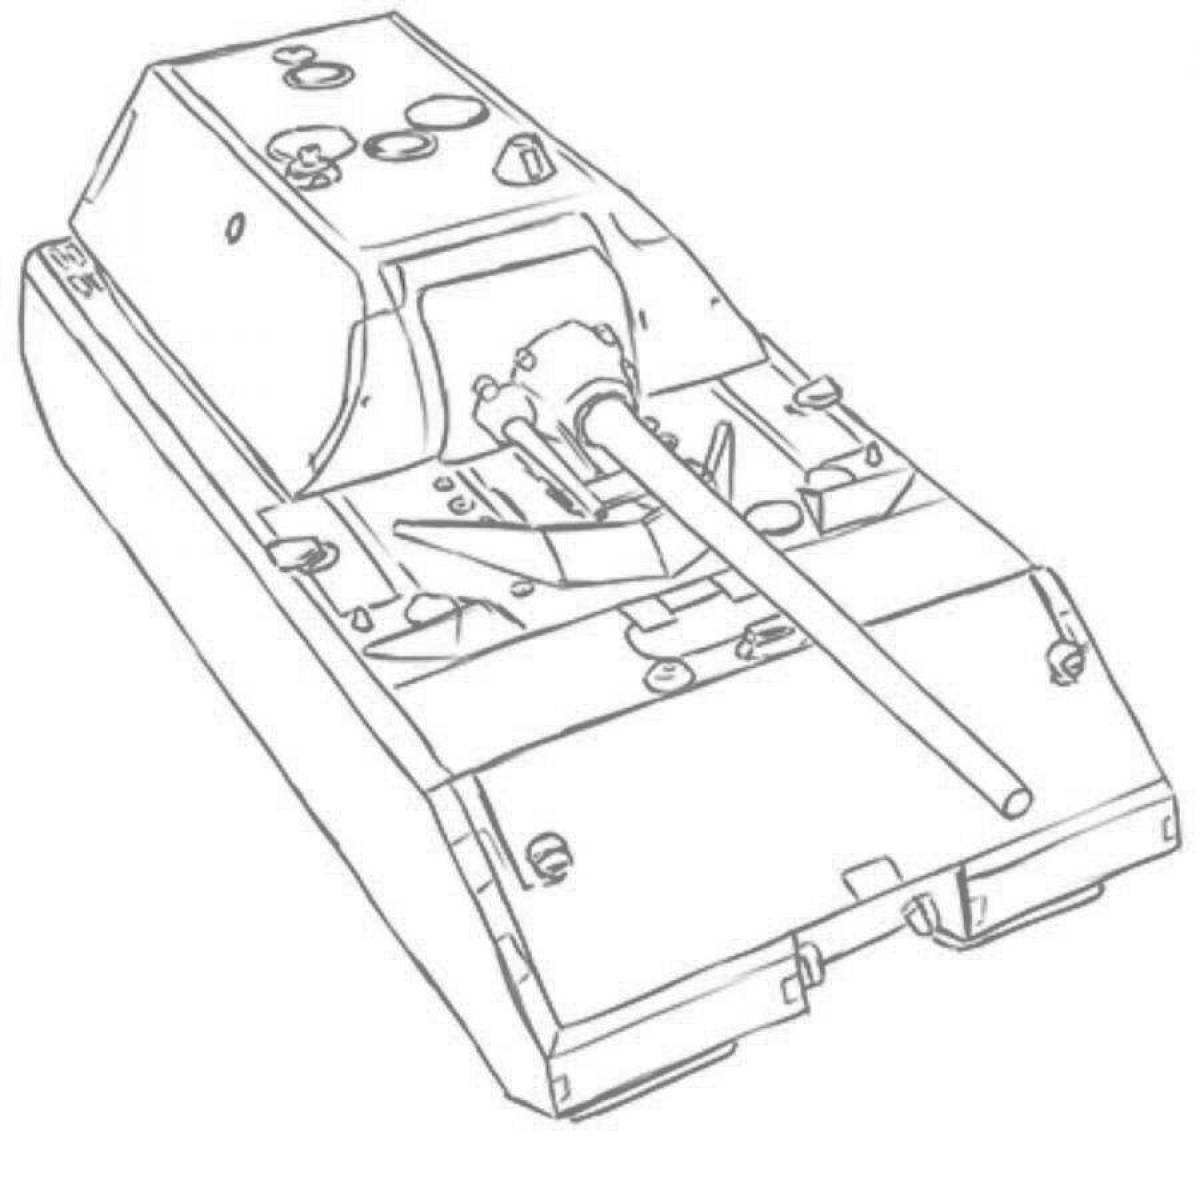 Shiny mouse tank coloring page